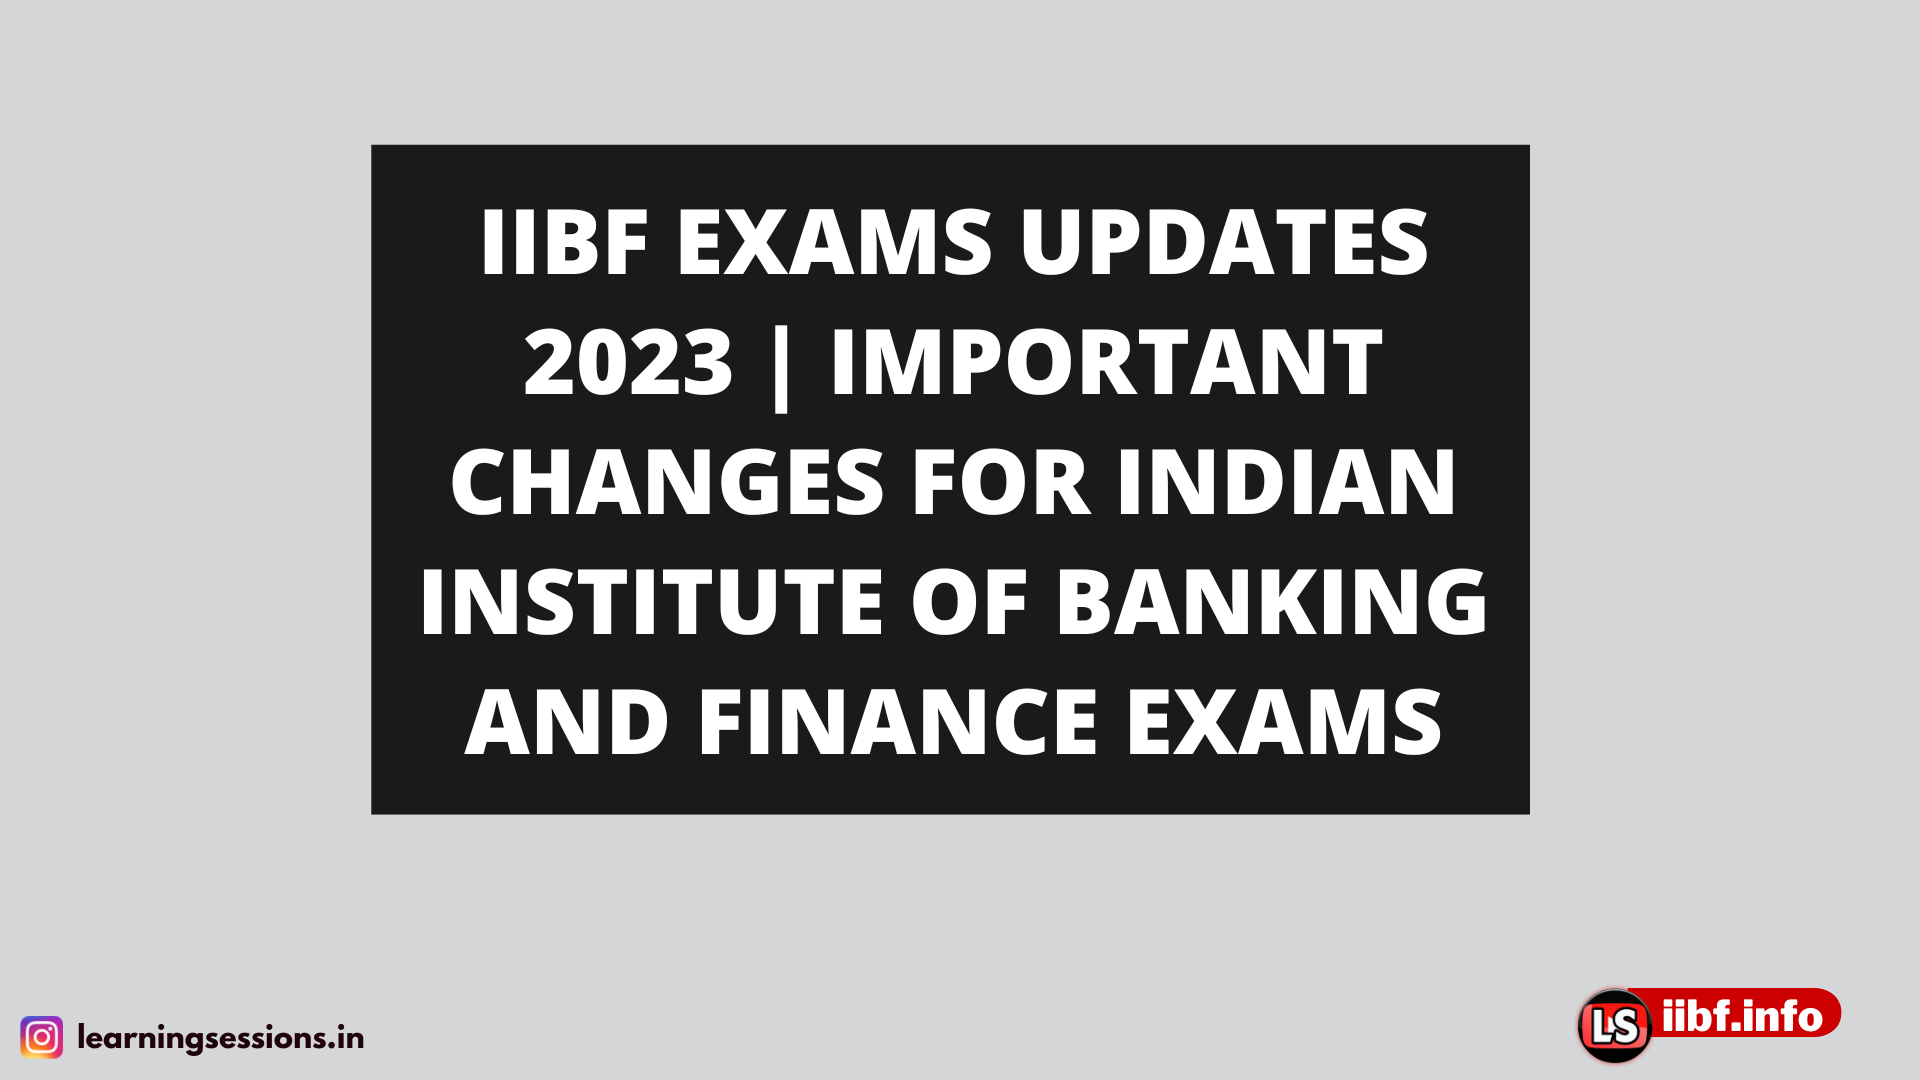 IIBF EXAMS UPDATES 2023 | IMPORTANT CHANGES FOR INDIAN INSTITUTE OF BANKING AND FINANCE EXAMS